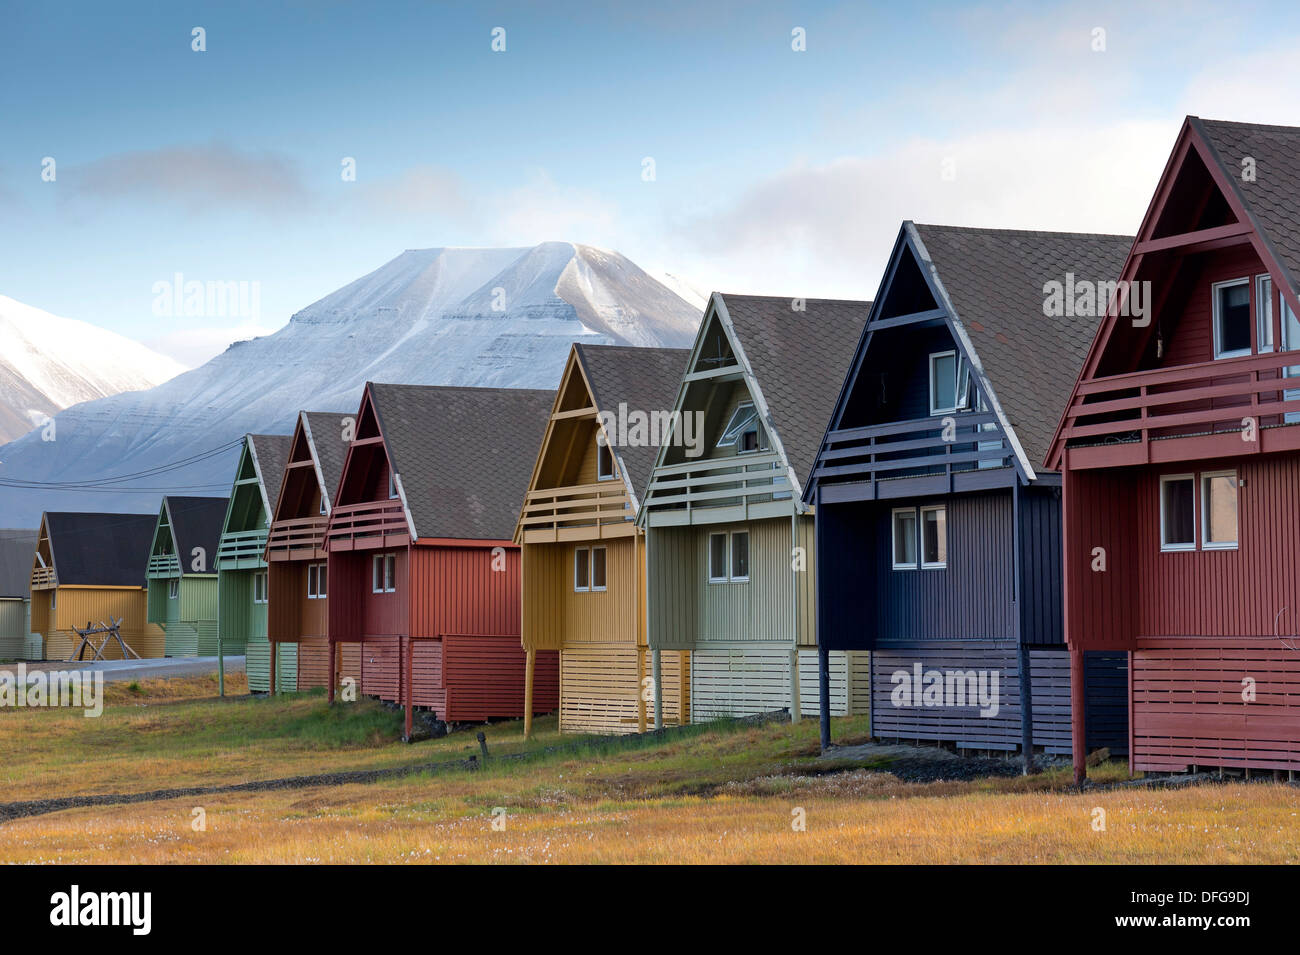 Colourful houses in front of snow-capped mountains, Longyearbyen, Spitsbergen Island, Svalbard Archipelago Stock Photo